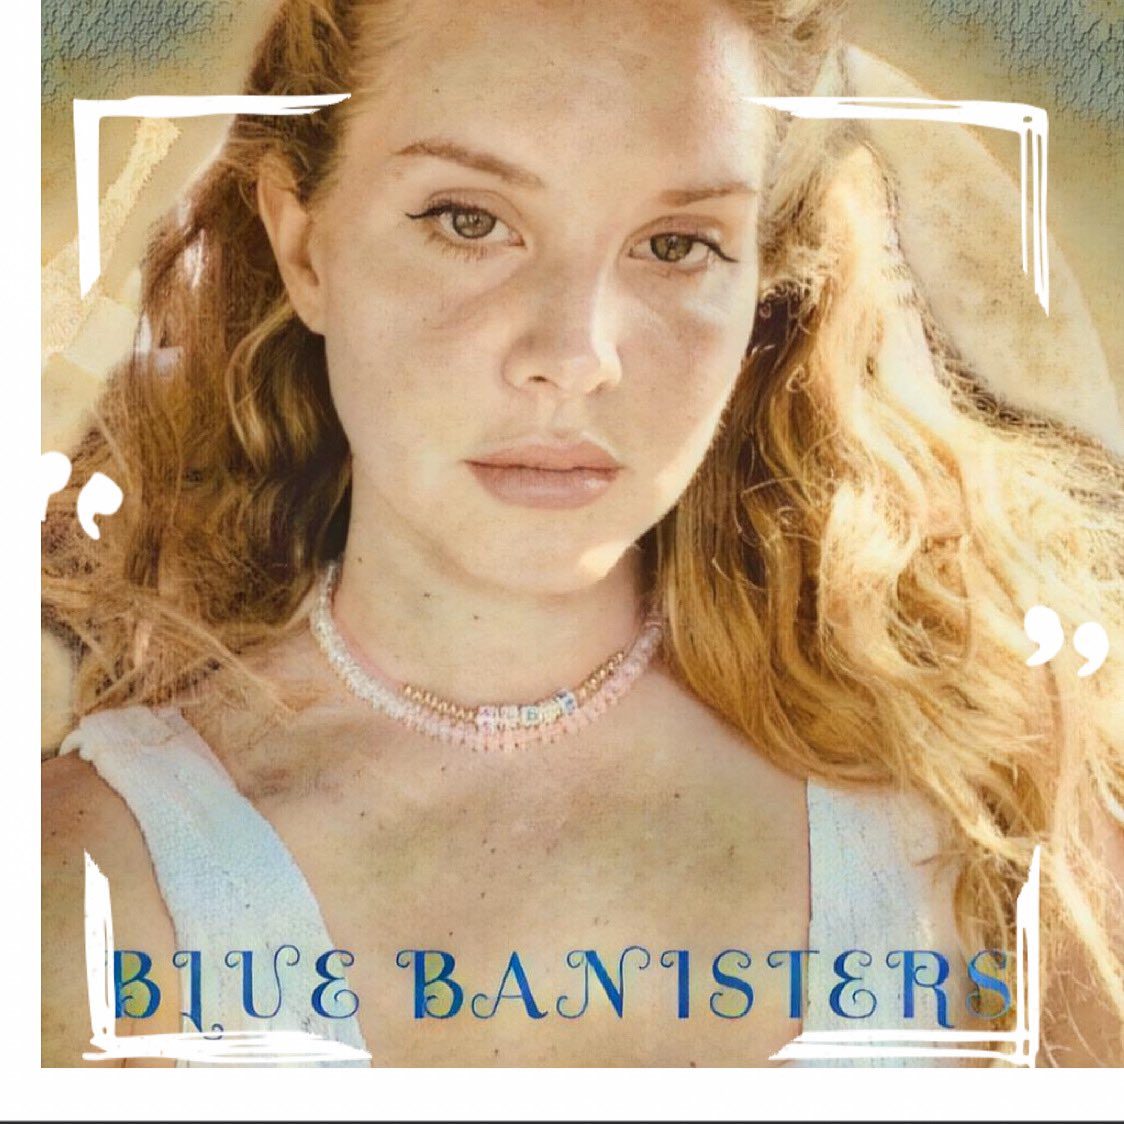 Lana Del Rey to release new album ‘Blue Banisters’